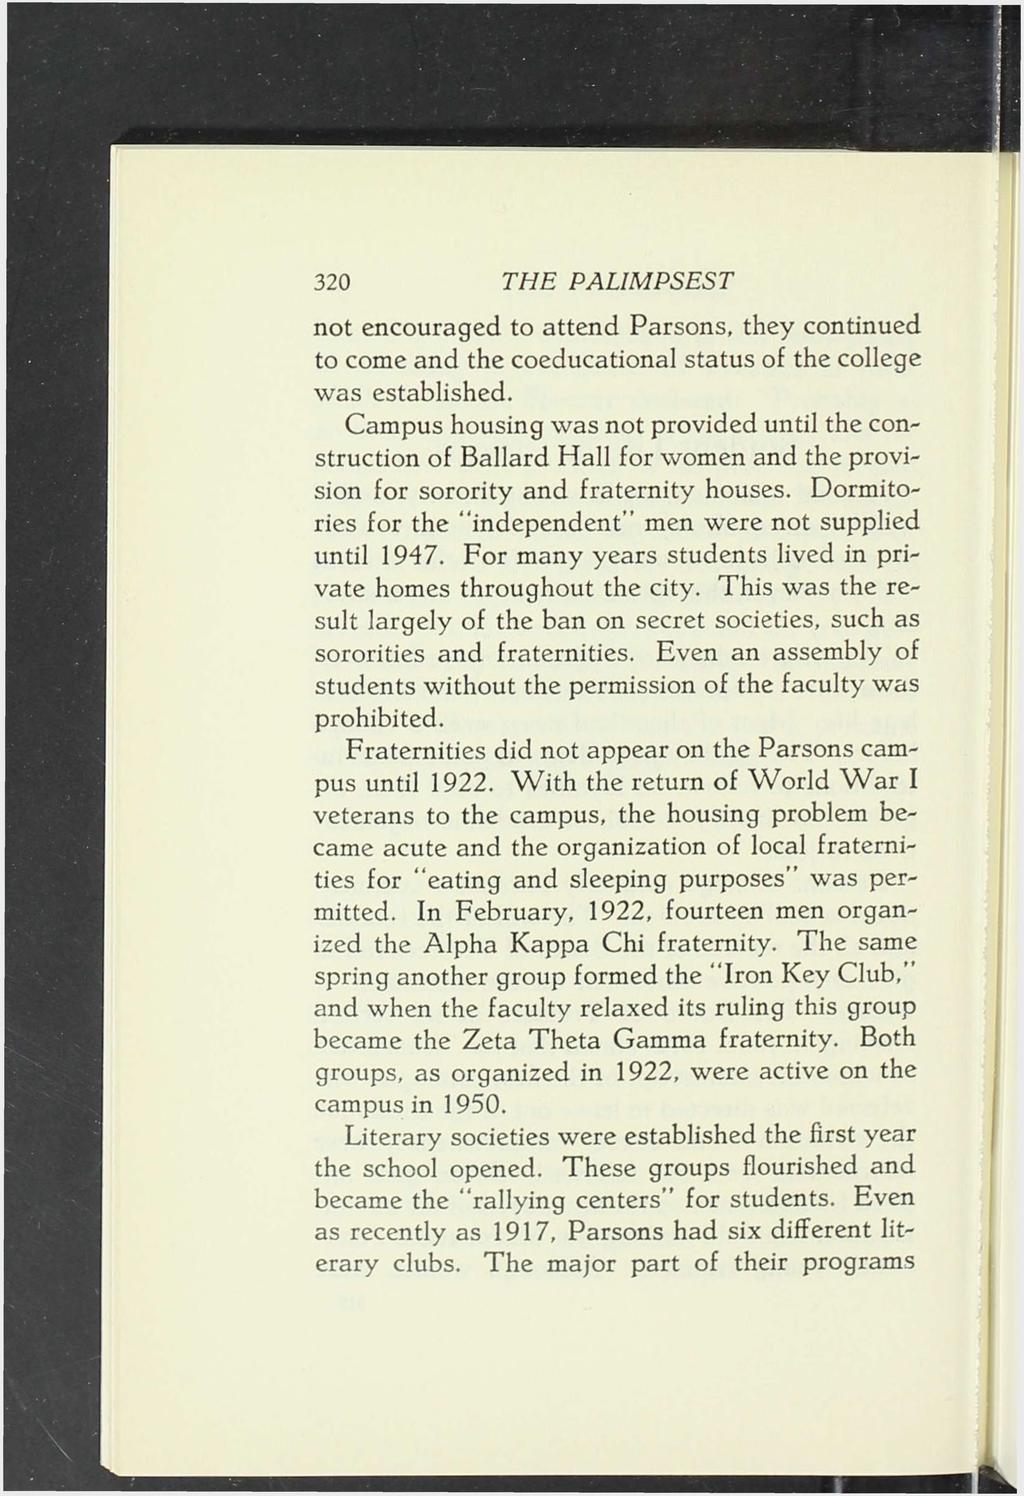 t ) I «- 320 THE PALIMPSEST not encouraged to attend Parsons, they continued to come and the coeducational status of the college was established.